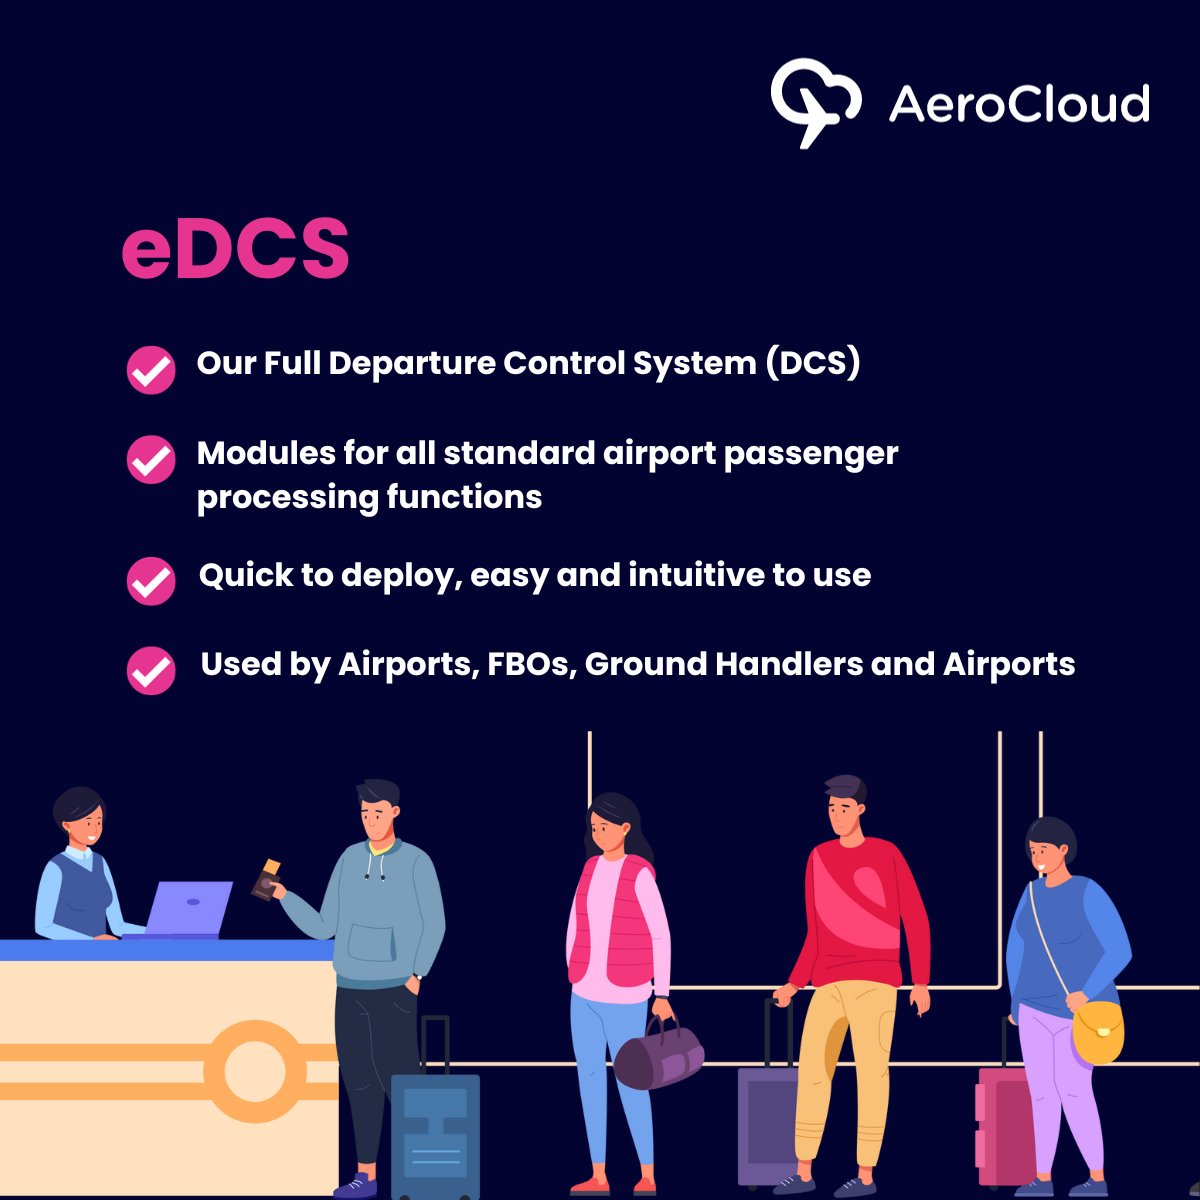 Our versatile Departure Control System (DCS) is trusted by #Airports, #FBOs, #GroundHandlers, and #airlines alike. It empowers airport staff and handlers with powerful tools to seamlessly manage departing and arriving passengers, crew, and baggage.
bit.ly/3PCZrMN